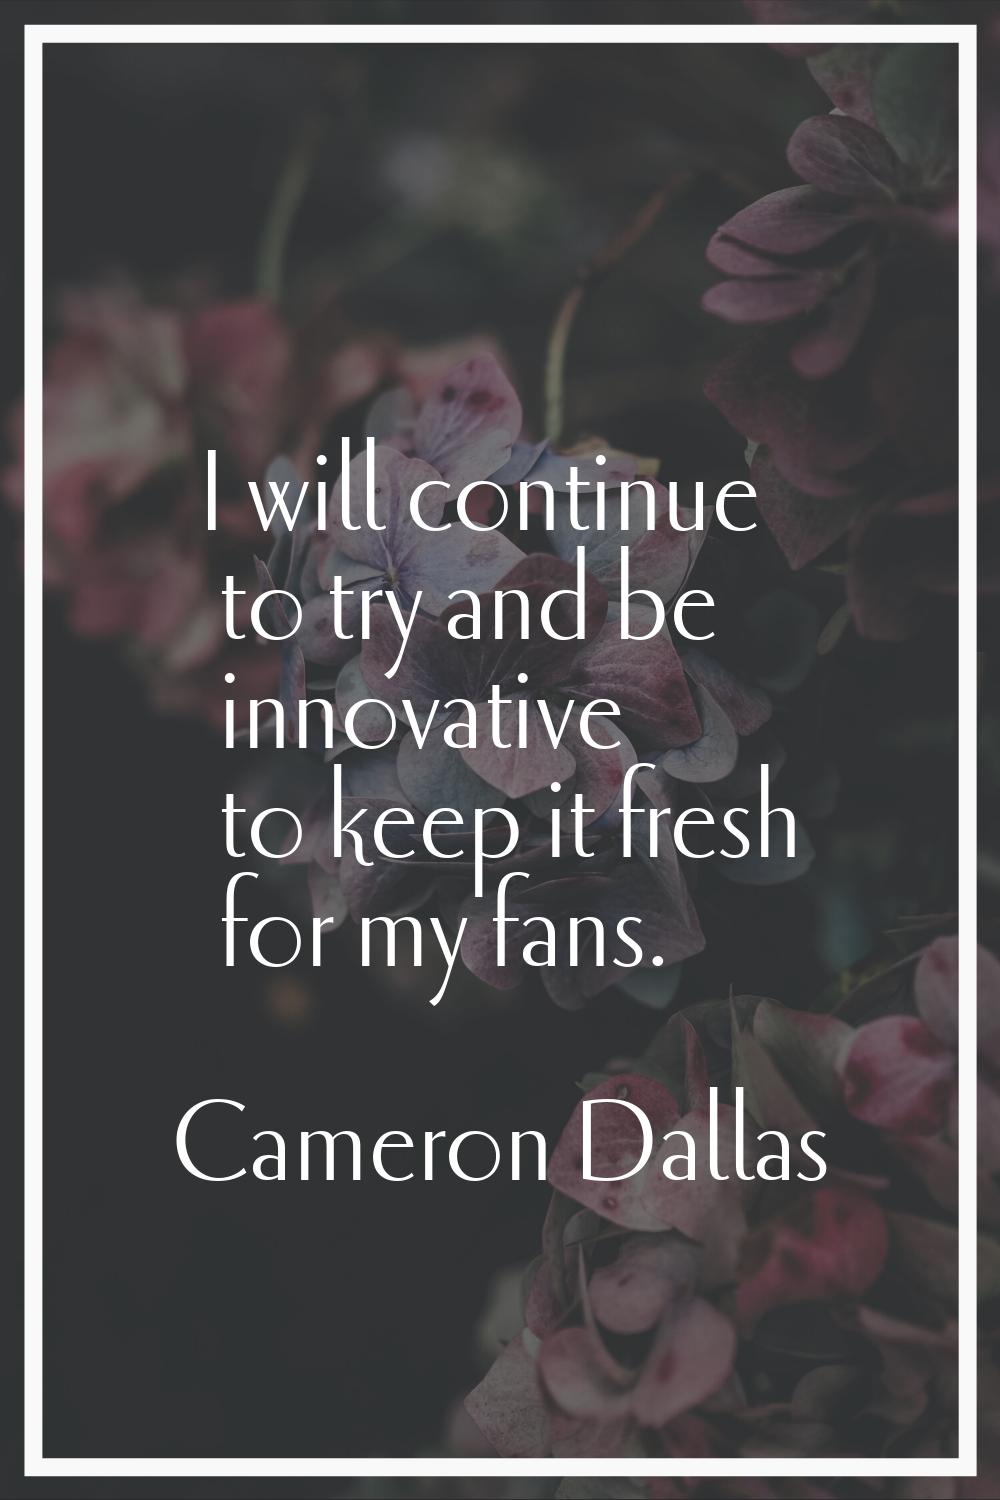 I will continue to try and be innovative to keep it fresh for my fans.